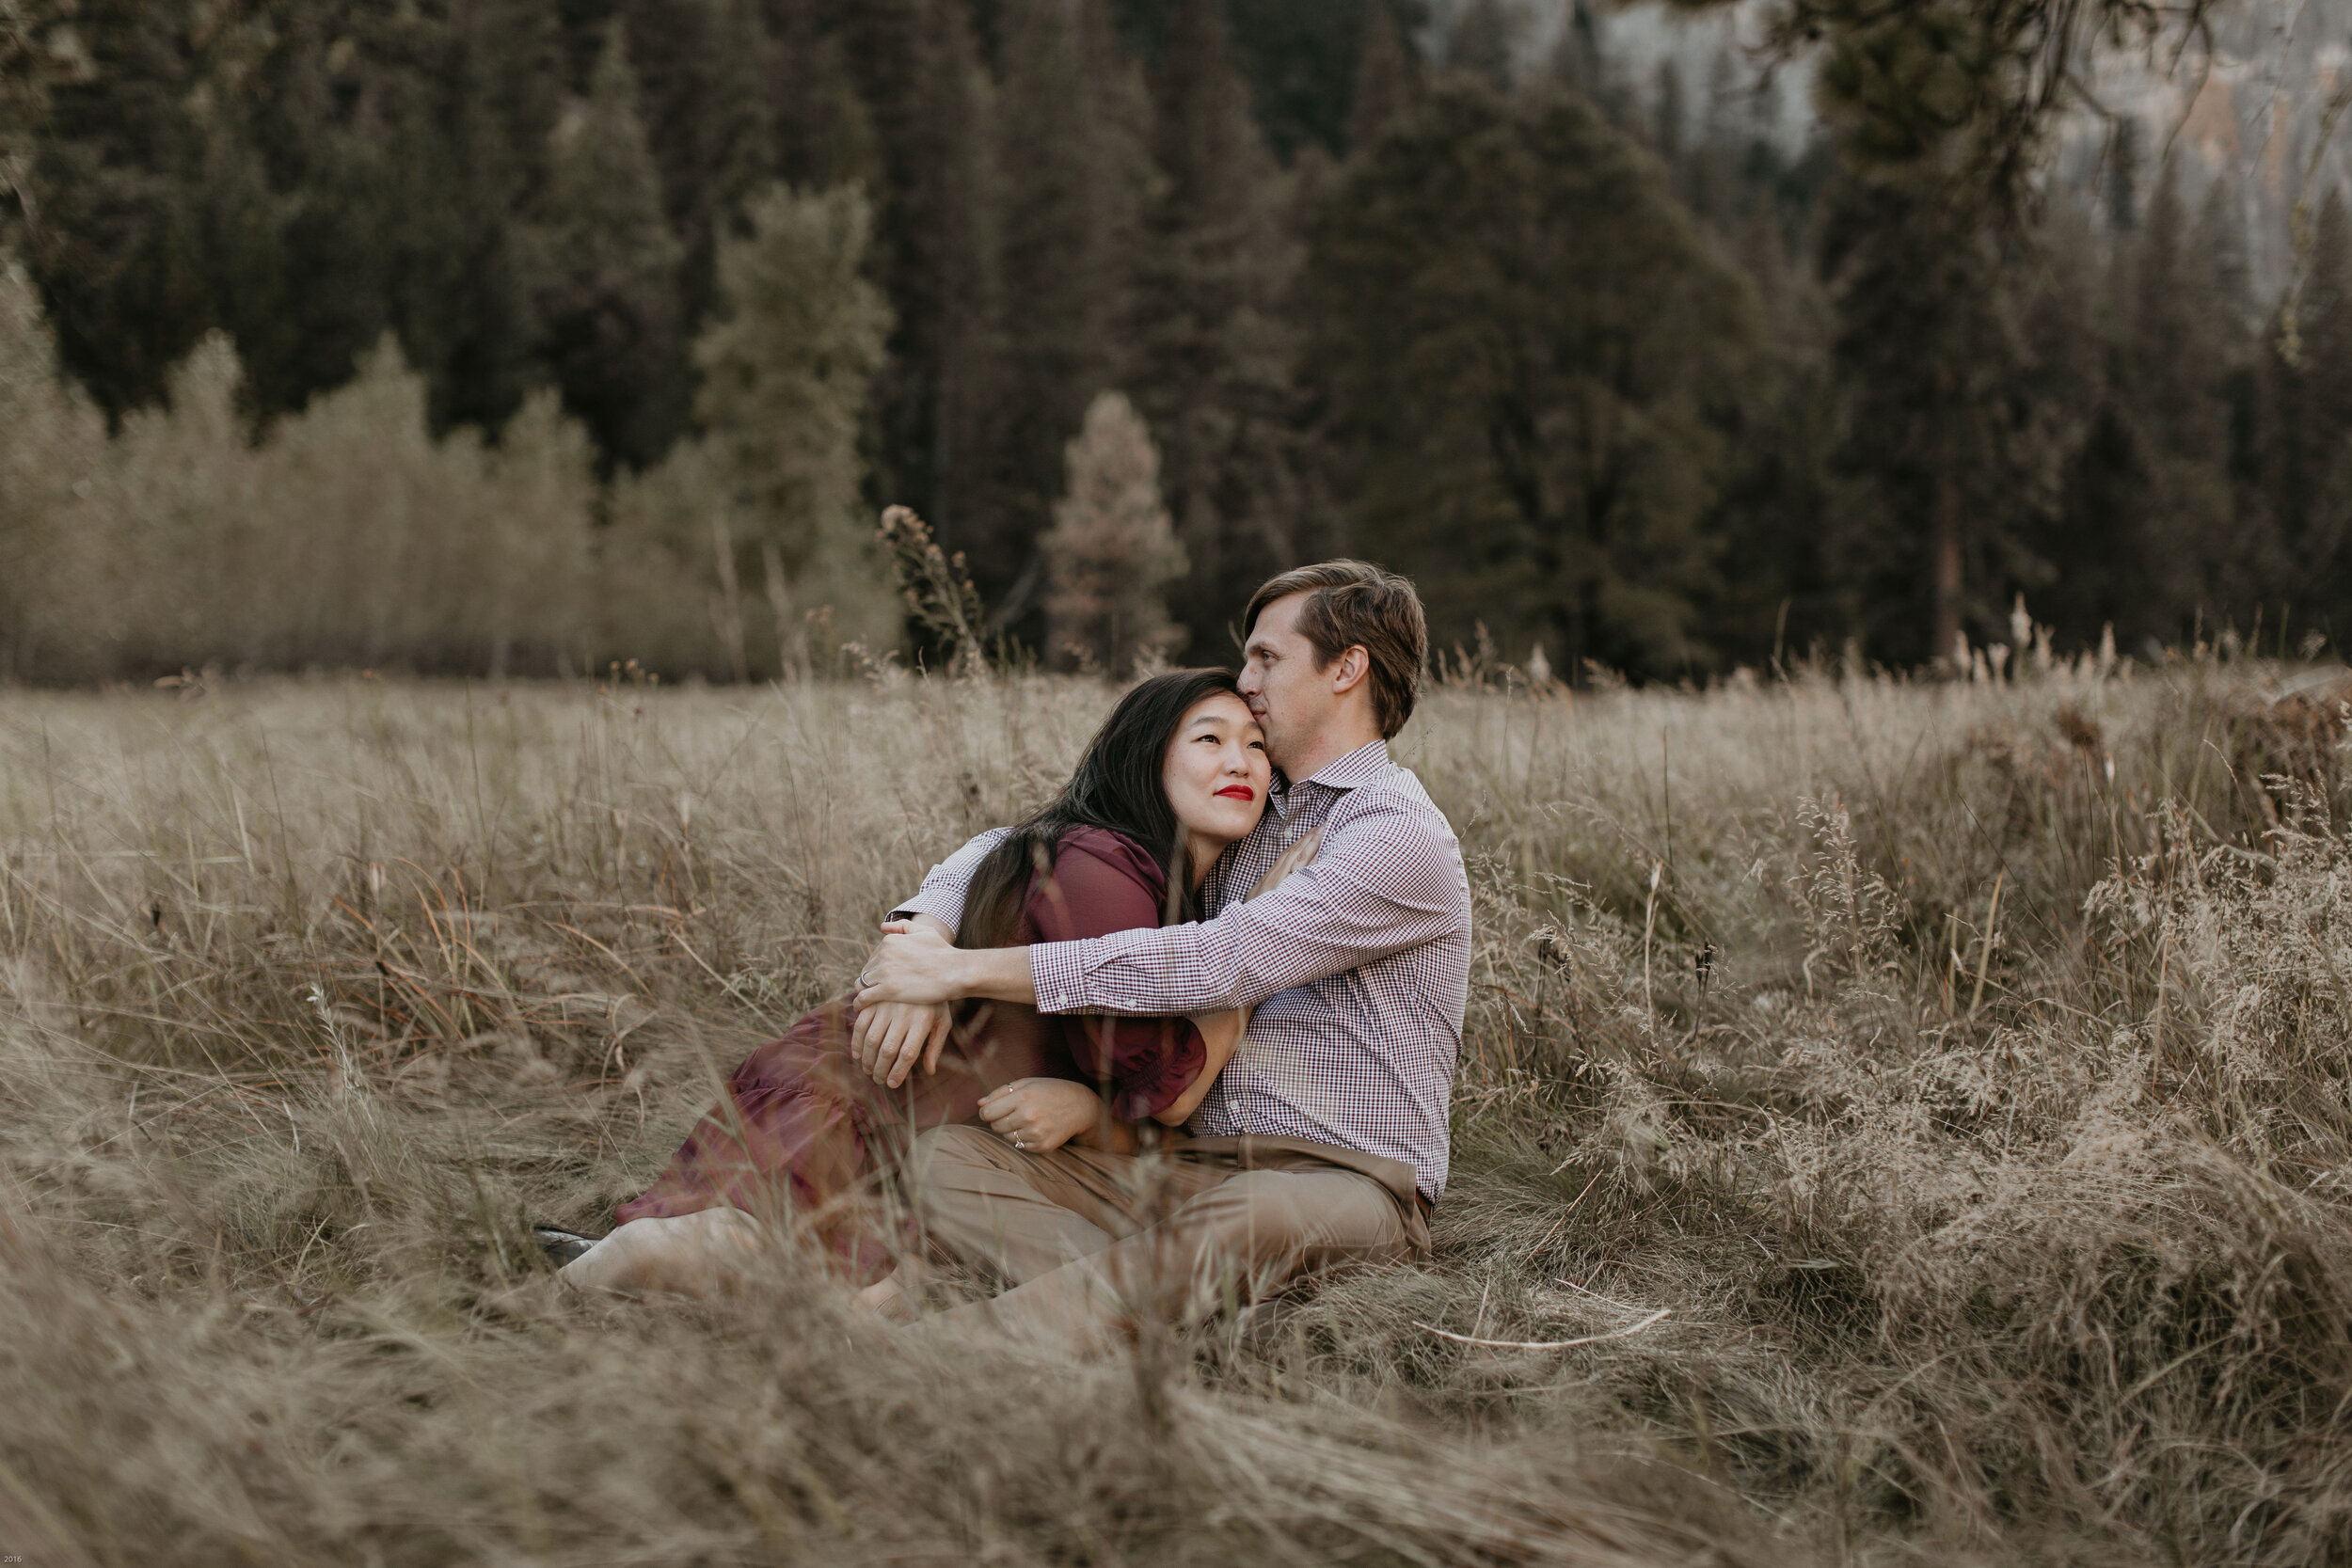 yosemite-national-park-couples-session-at-taft-point-and-yosemite-valley-yosemite-elopement-photographer-nicole-daacke-photography-113.jpg